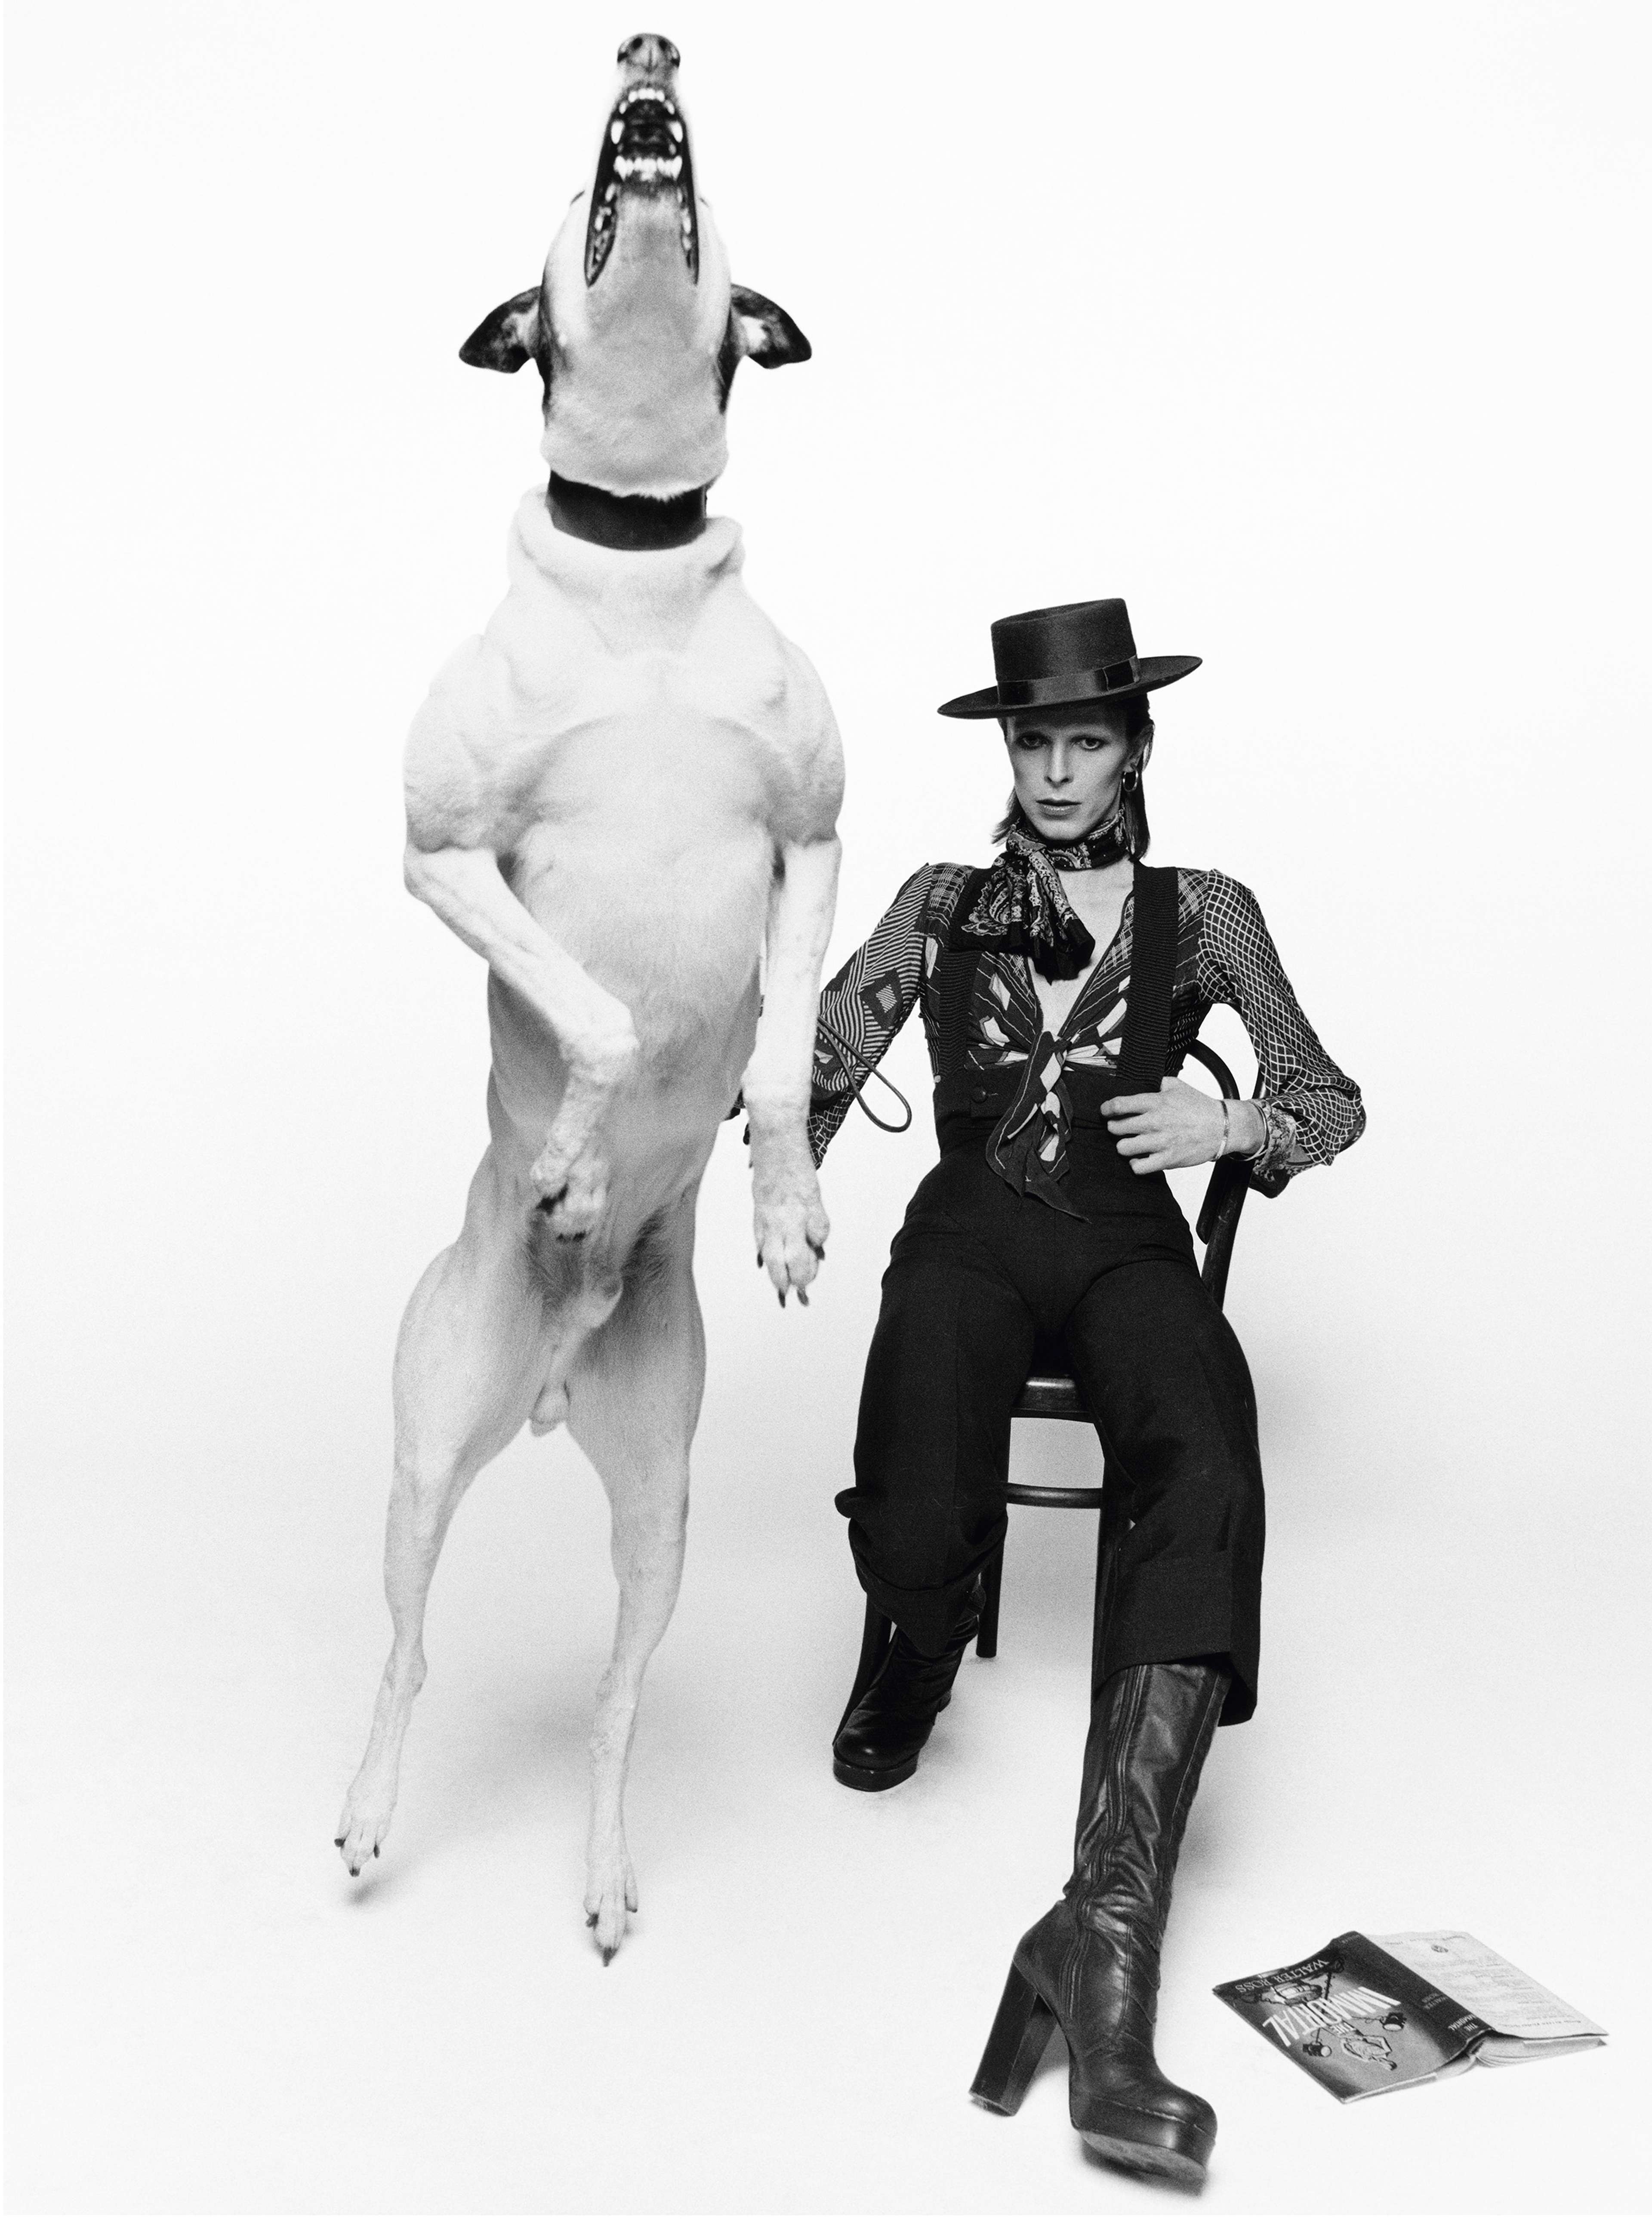 A black and white photograph by Terry O'Neill depicting David Bowie reclining on a wooden chair in flamboyant clothing, and a white dog jumping up in the foreground of the shot.